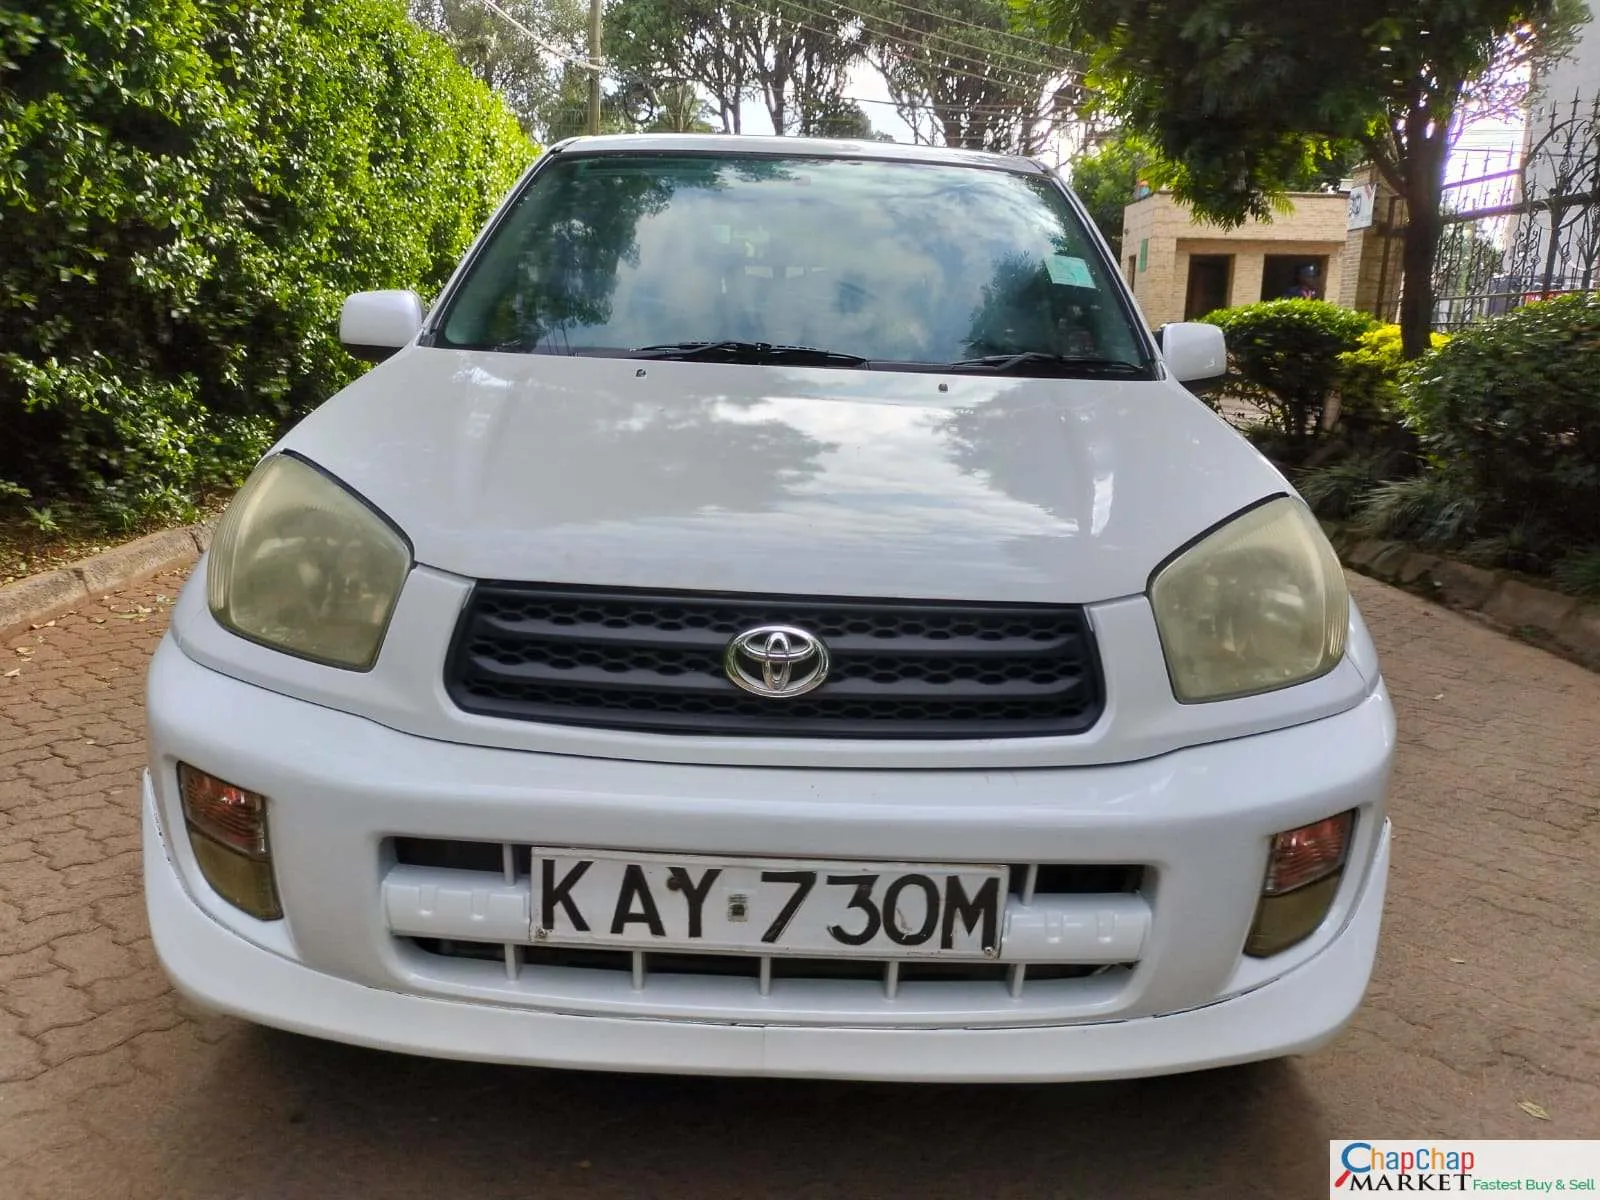 Toyota RAV4 Kenya CHEAPEST Toyota RAV4 for sale in kenya You Pay 30% Deposit HIRE PURCHASE installments Trade in OK EXCLUSIVE